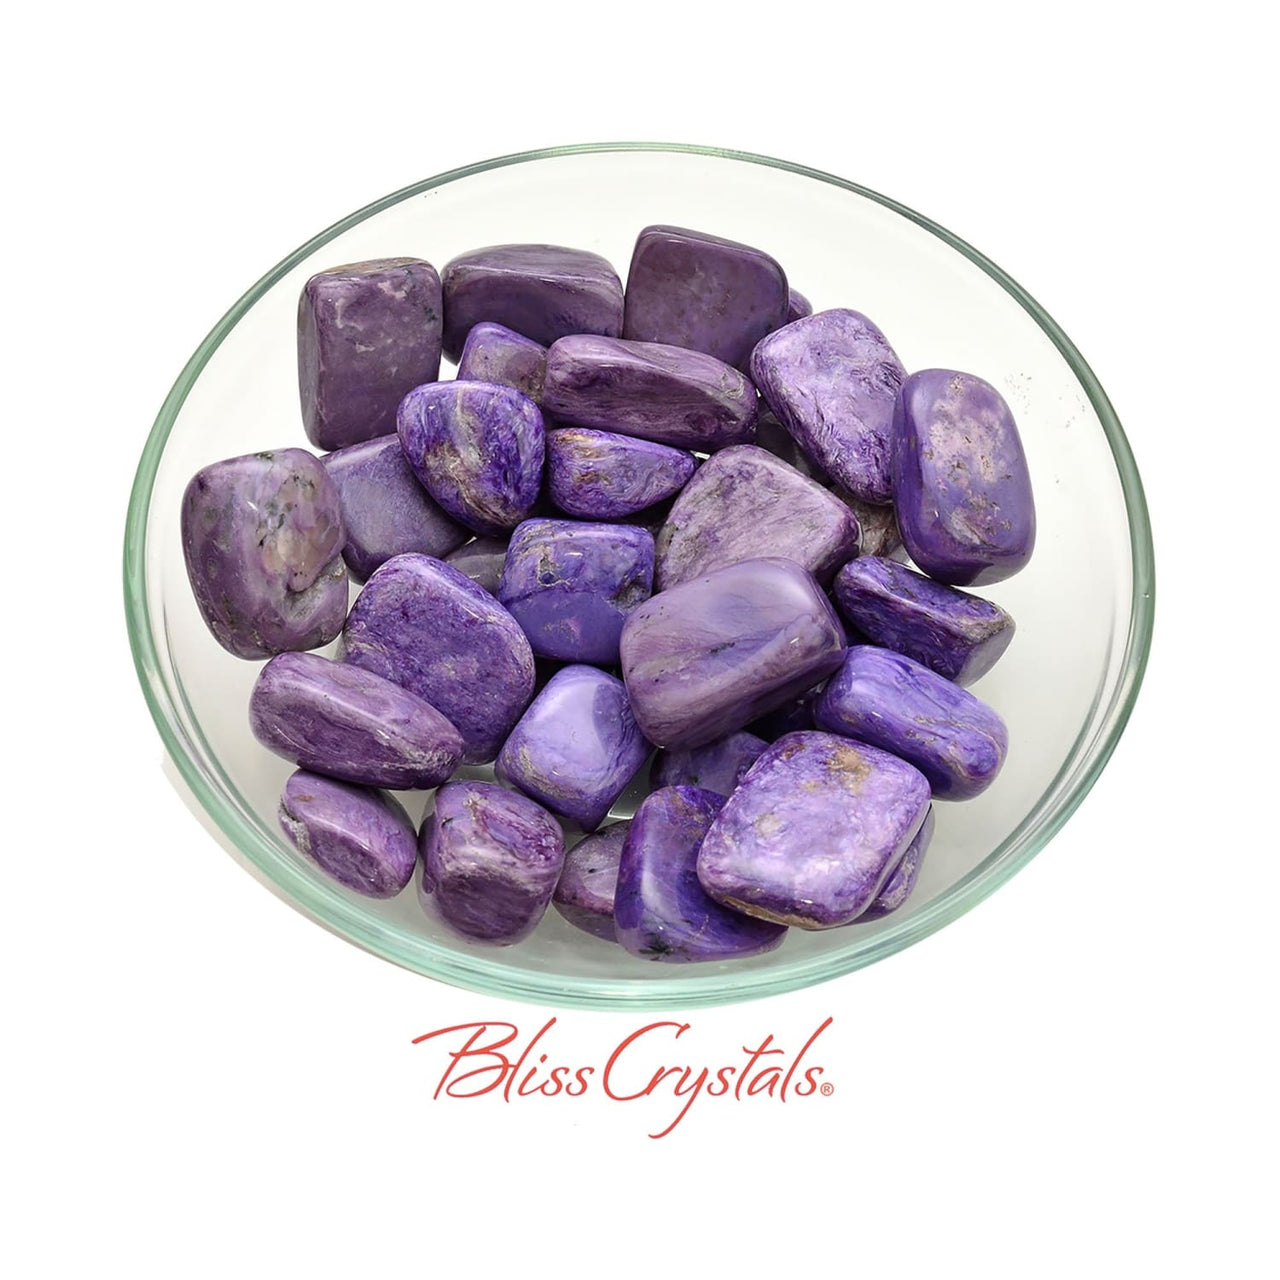 1 CHAROITE Tumbled Stone Rare Healing Crystal and Stone from